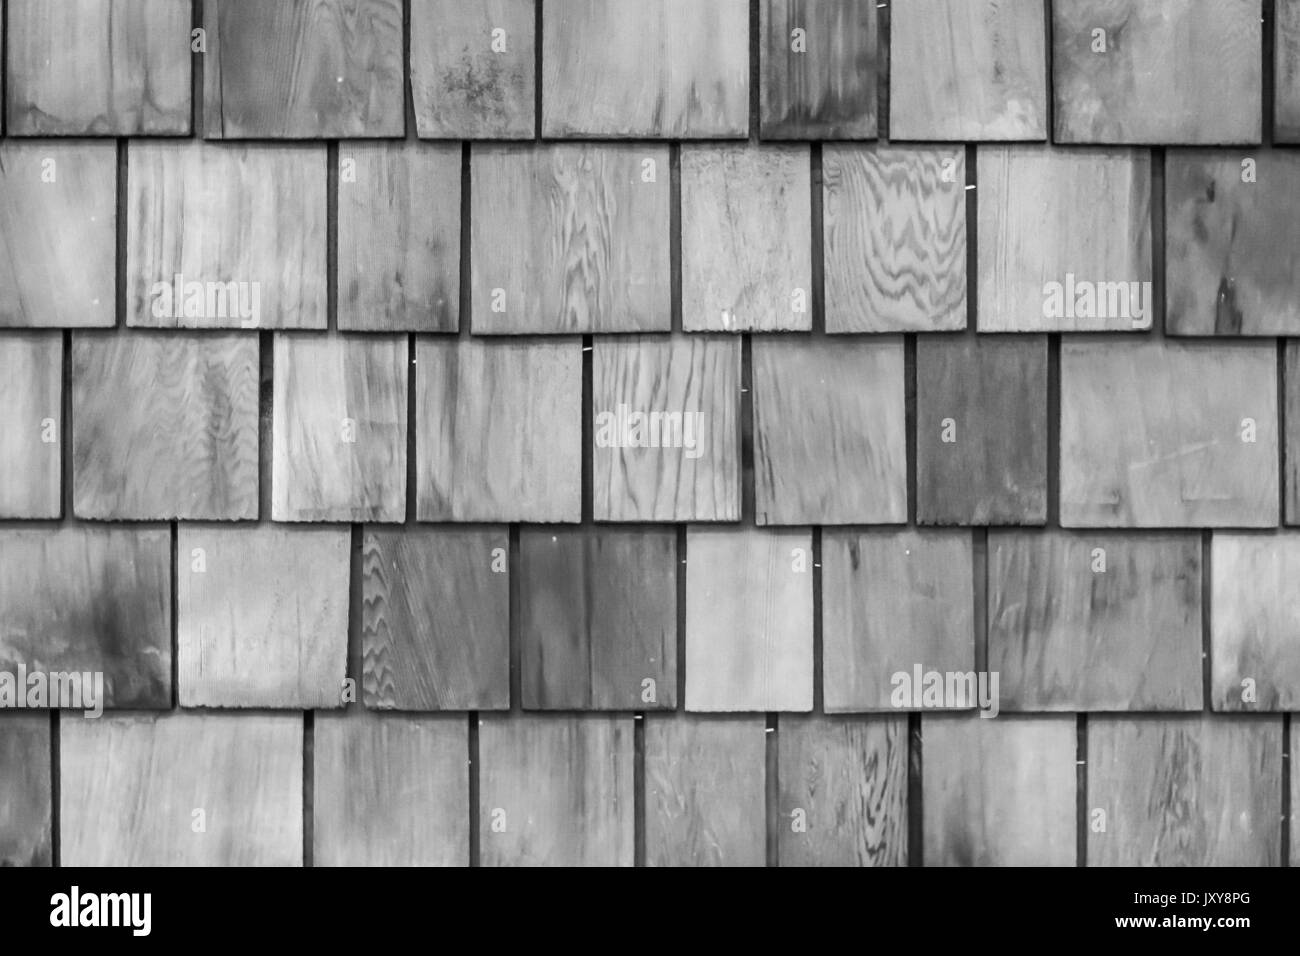 Black and white wood pattern texture background.Wood block background Stock Photo